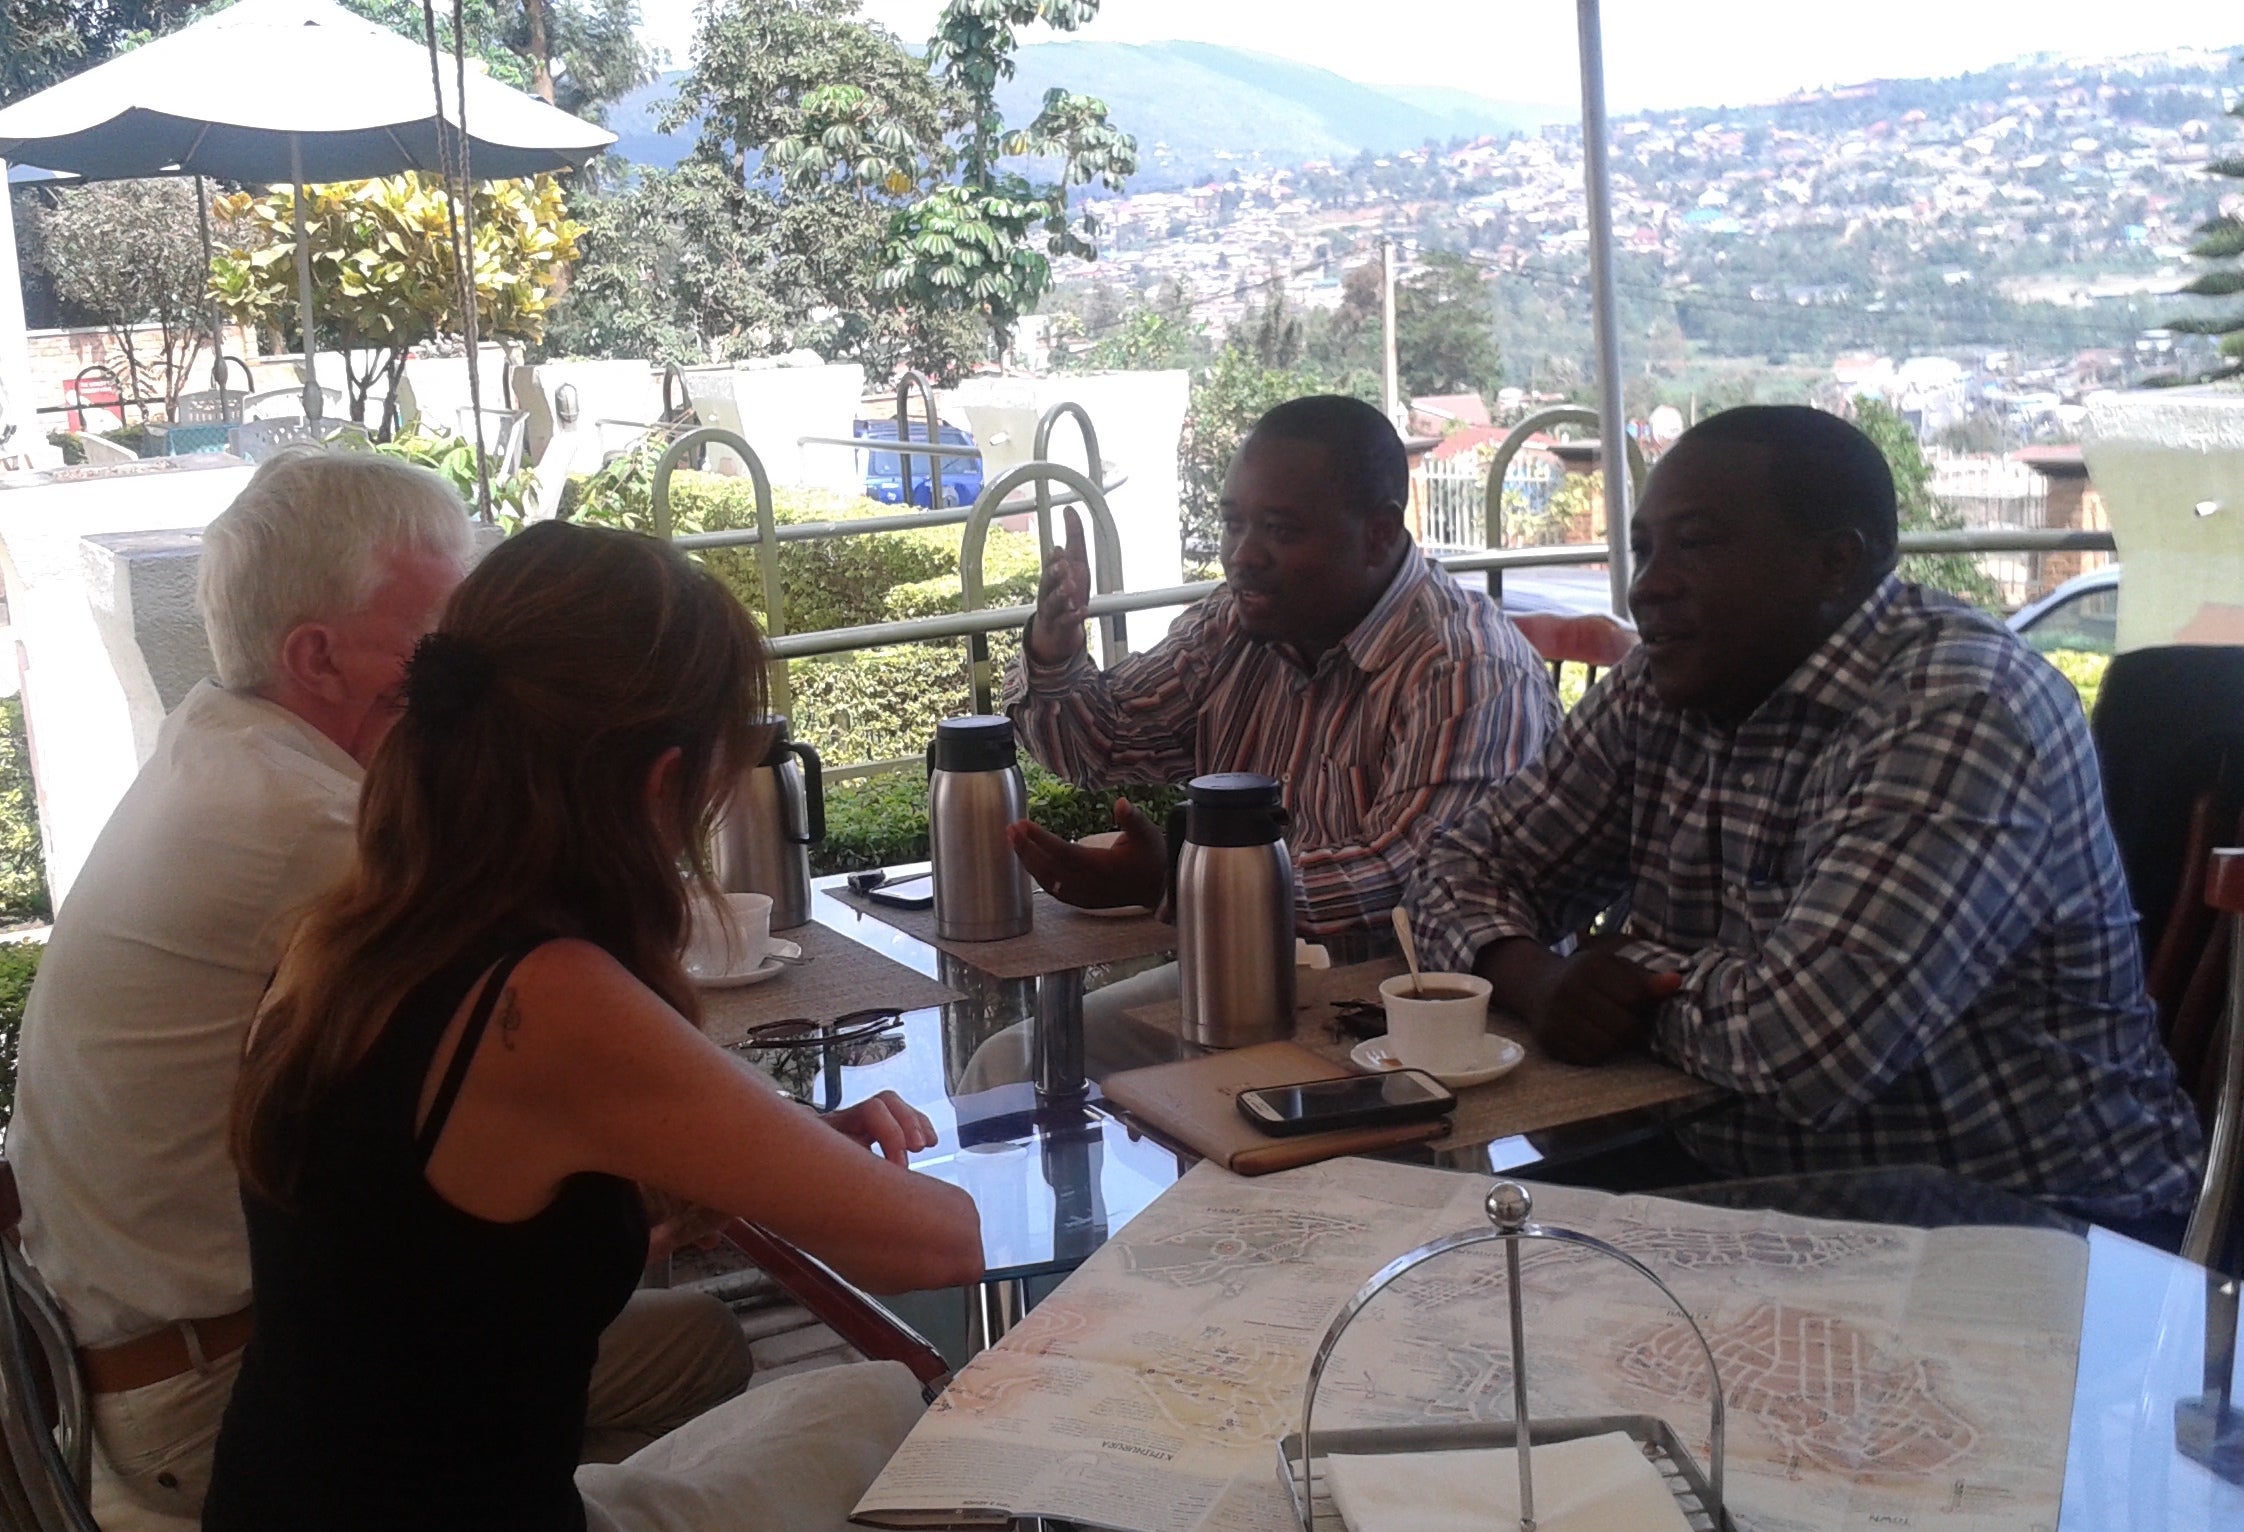 Wendy Murphy and her husband Tim (far left) meet with JMV Gatabazi MP (far right) and another Rwandan official in Kigali